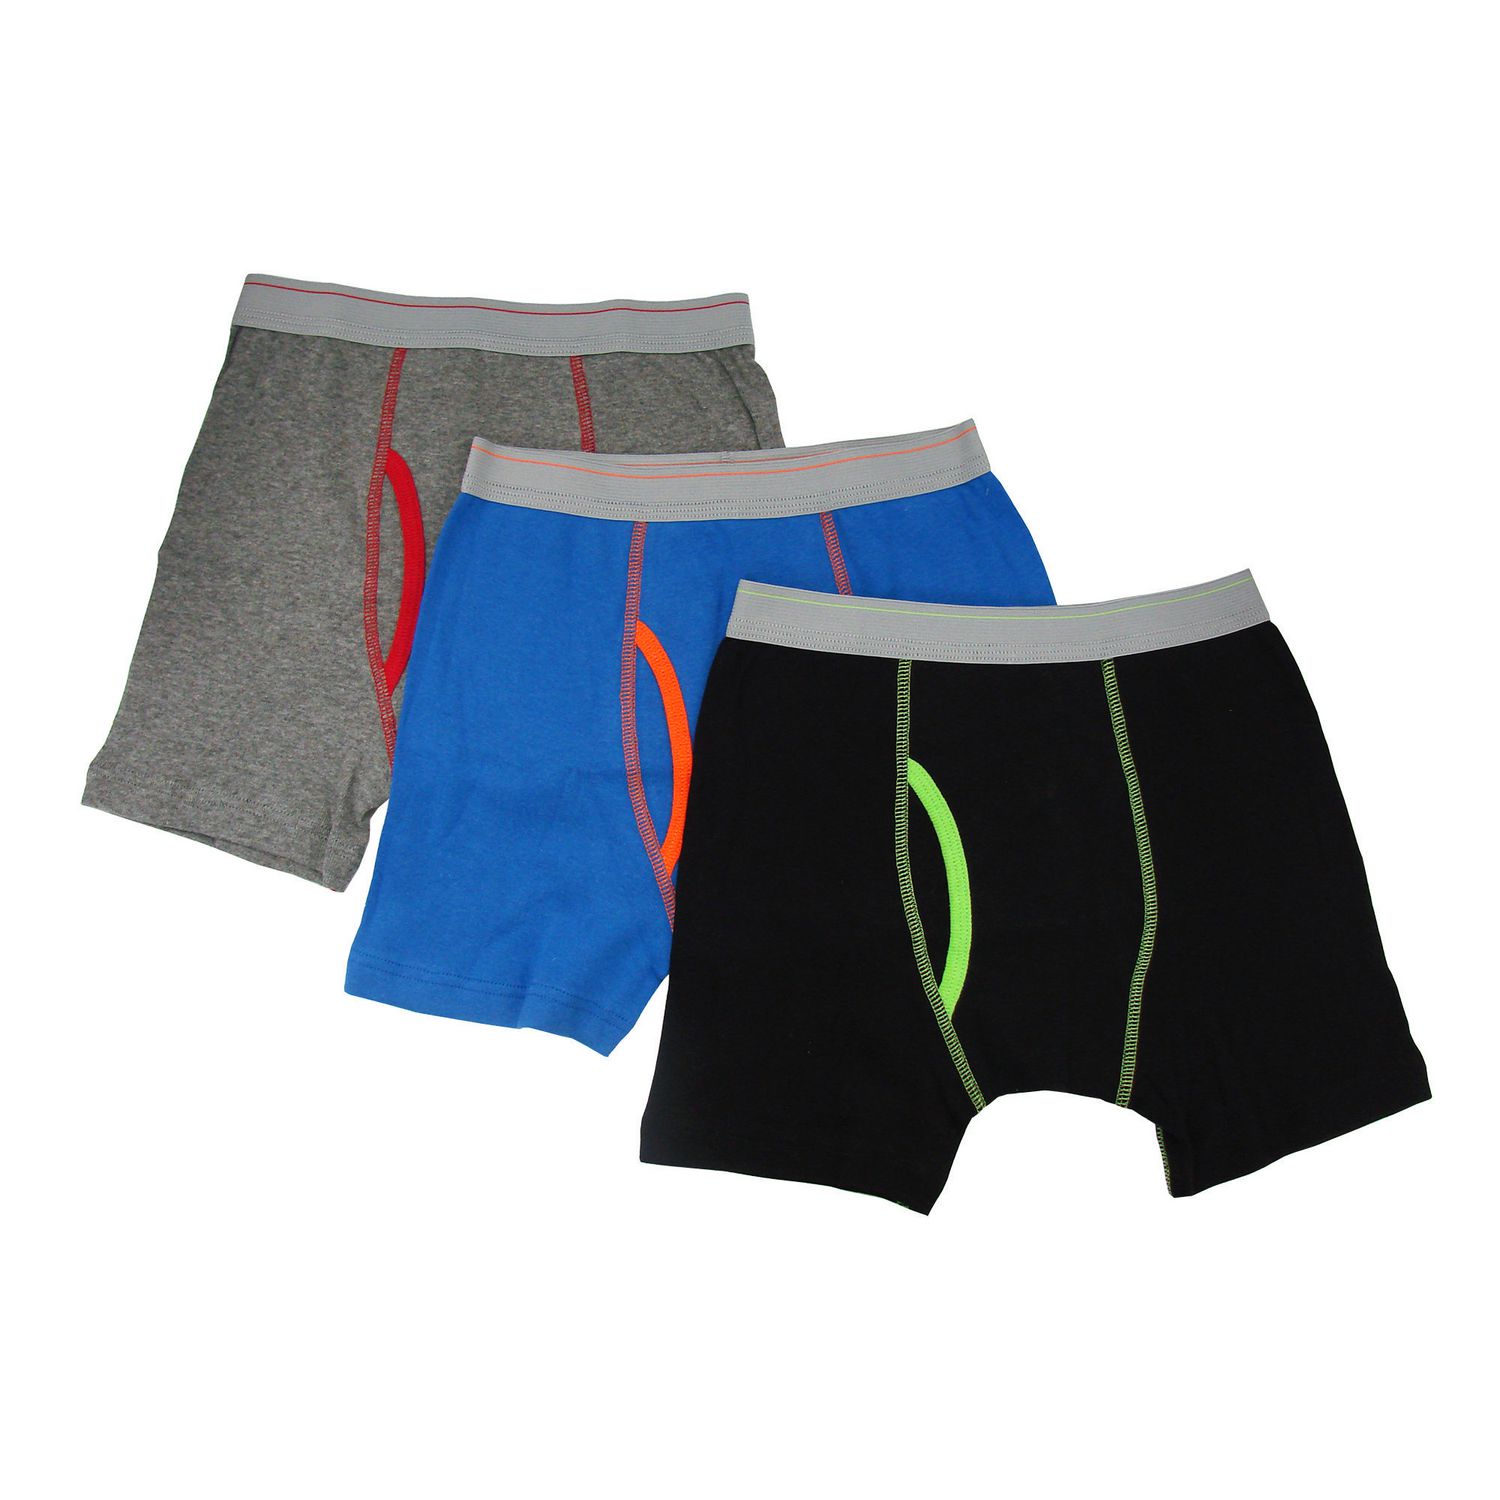 Bluey Toddler Boy's briefs. These boys underwear come in a pack of